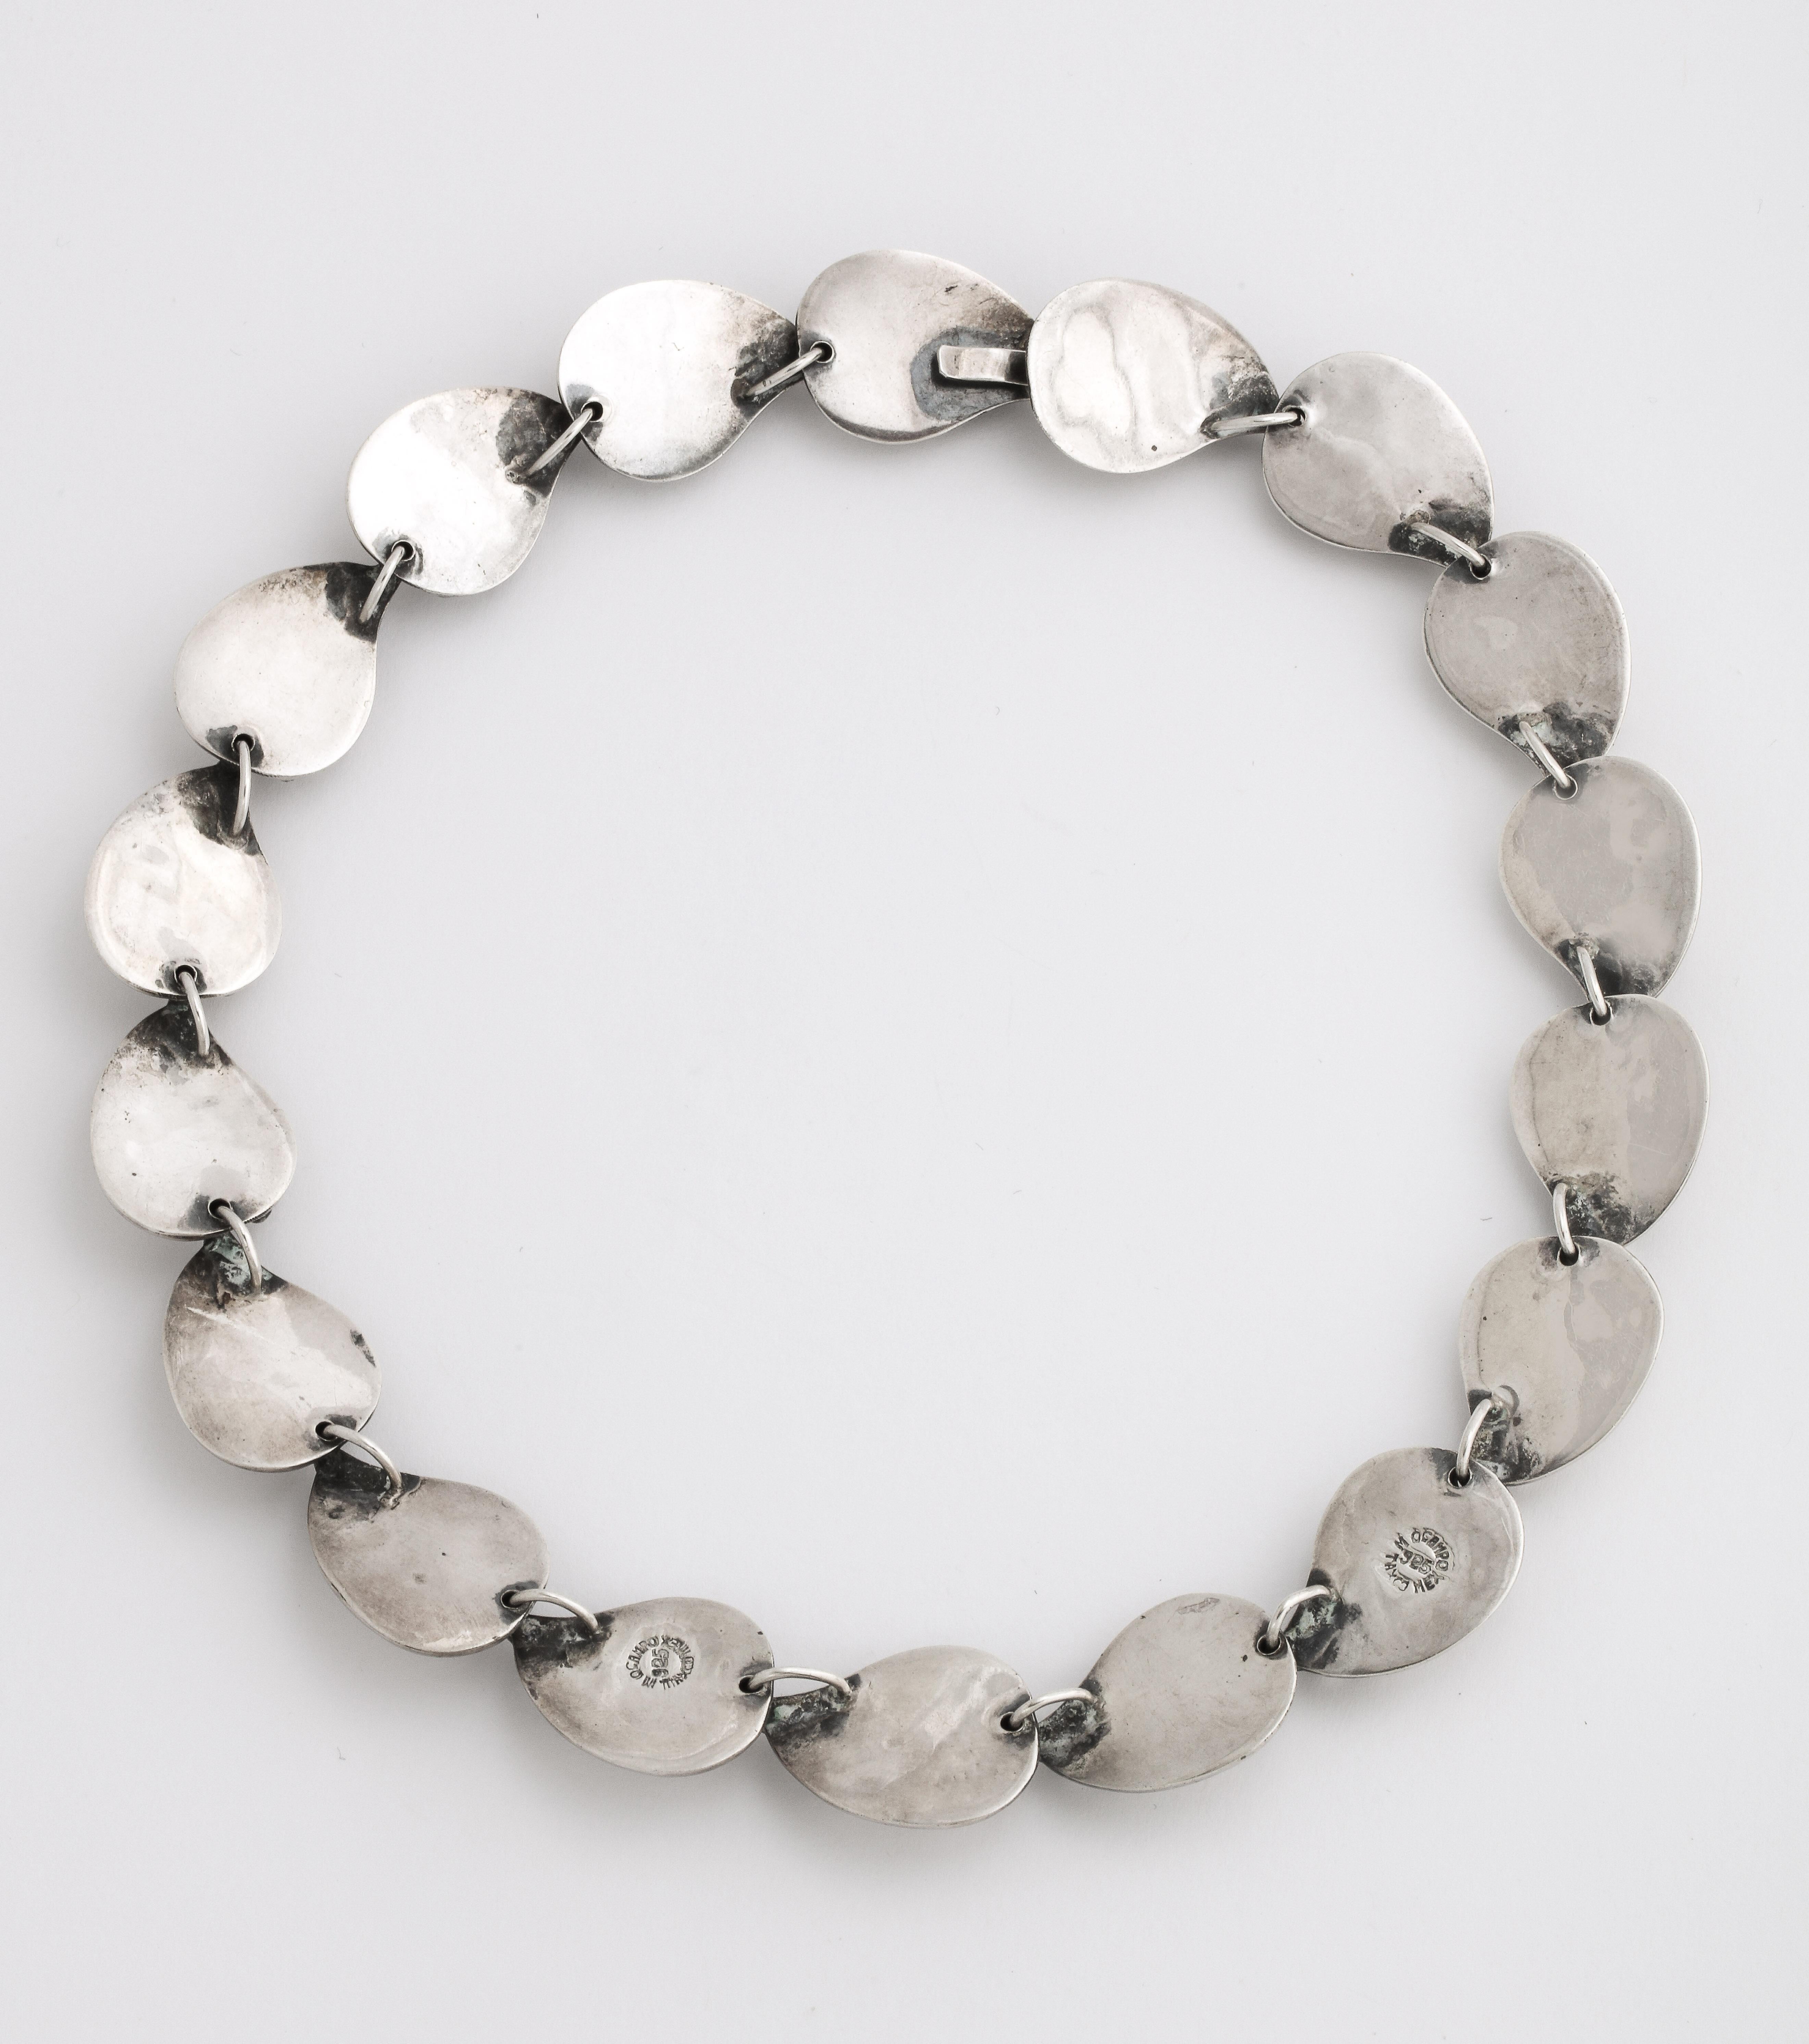 taxco silver necklace